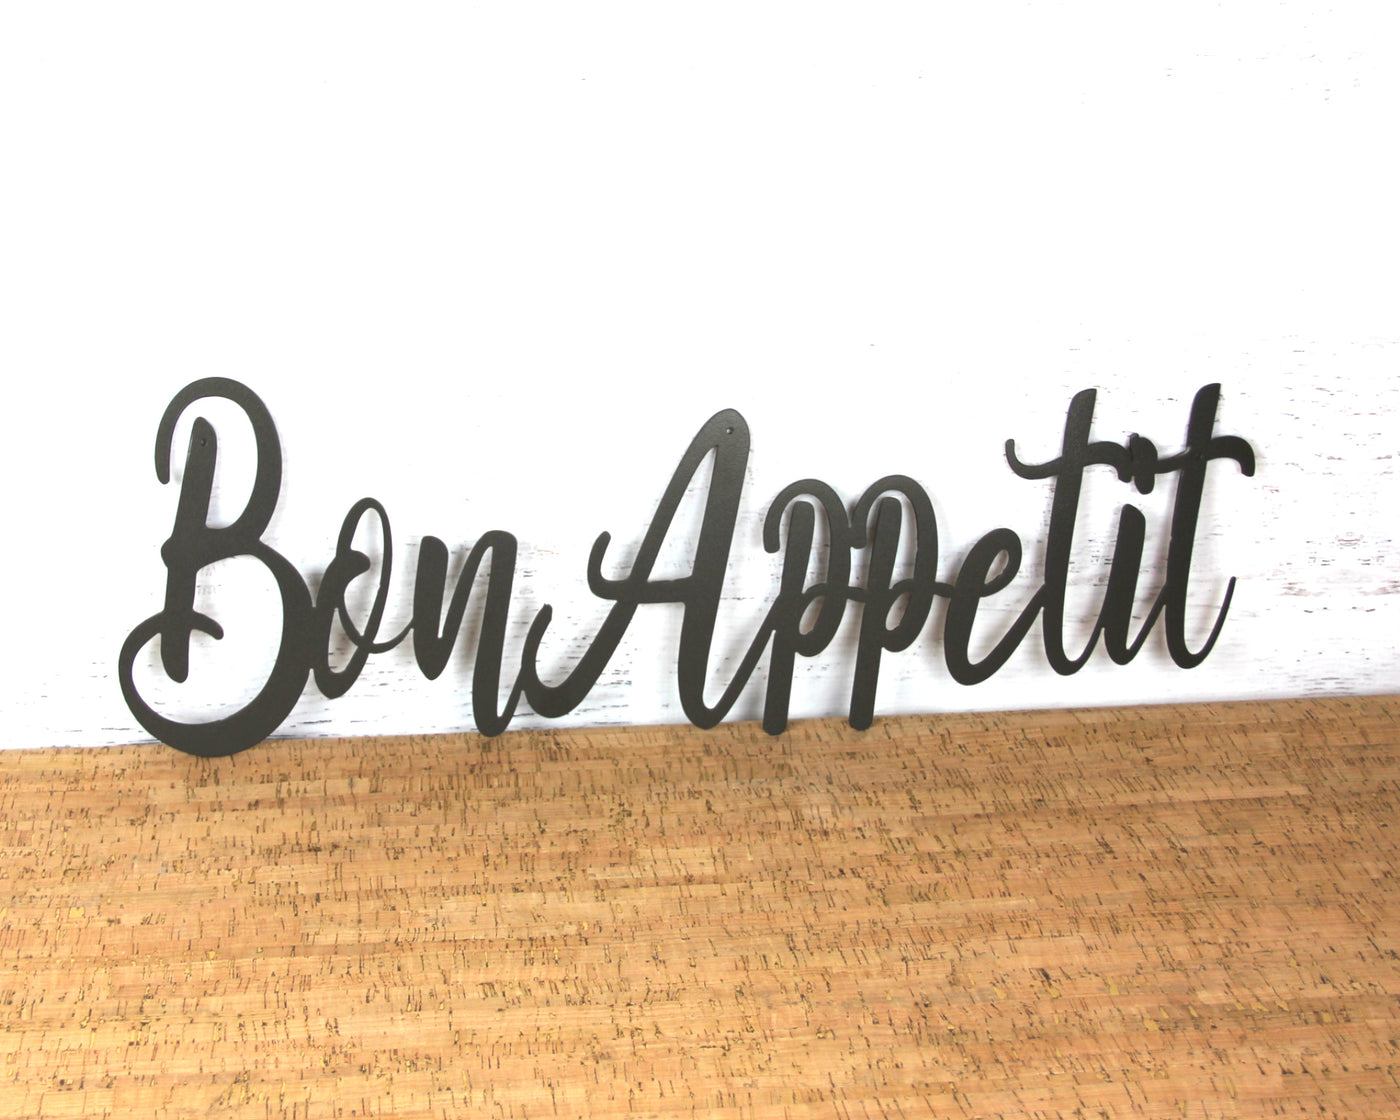 Bon Appetit Metal Word Sign - Madison Iron and Wood - Wall Art - metal outdoor decor - Steel deocrations - american made products - veteran owned business products - fencing decorations - fencing supplies - custom wall decorations - personalized wall signs - steel - decorative post caps - steel post caps - metal post caps - brackets - structural brackets - home improvement - easter - easter decorations - easter gift - easter yard decor